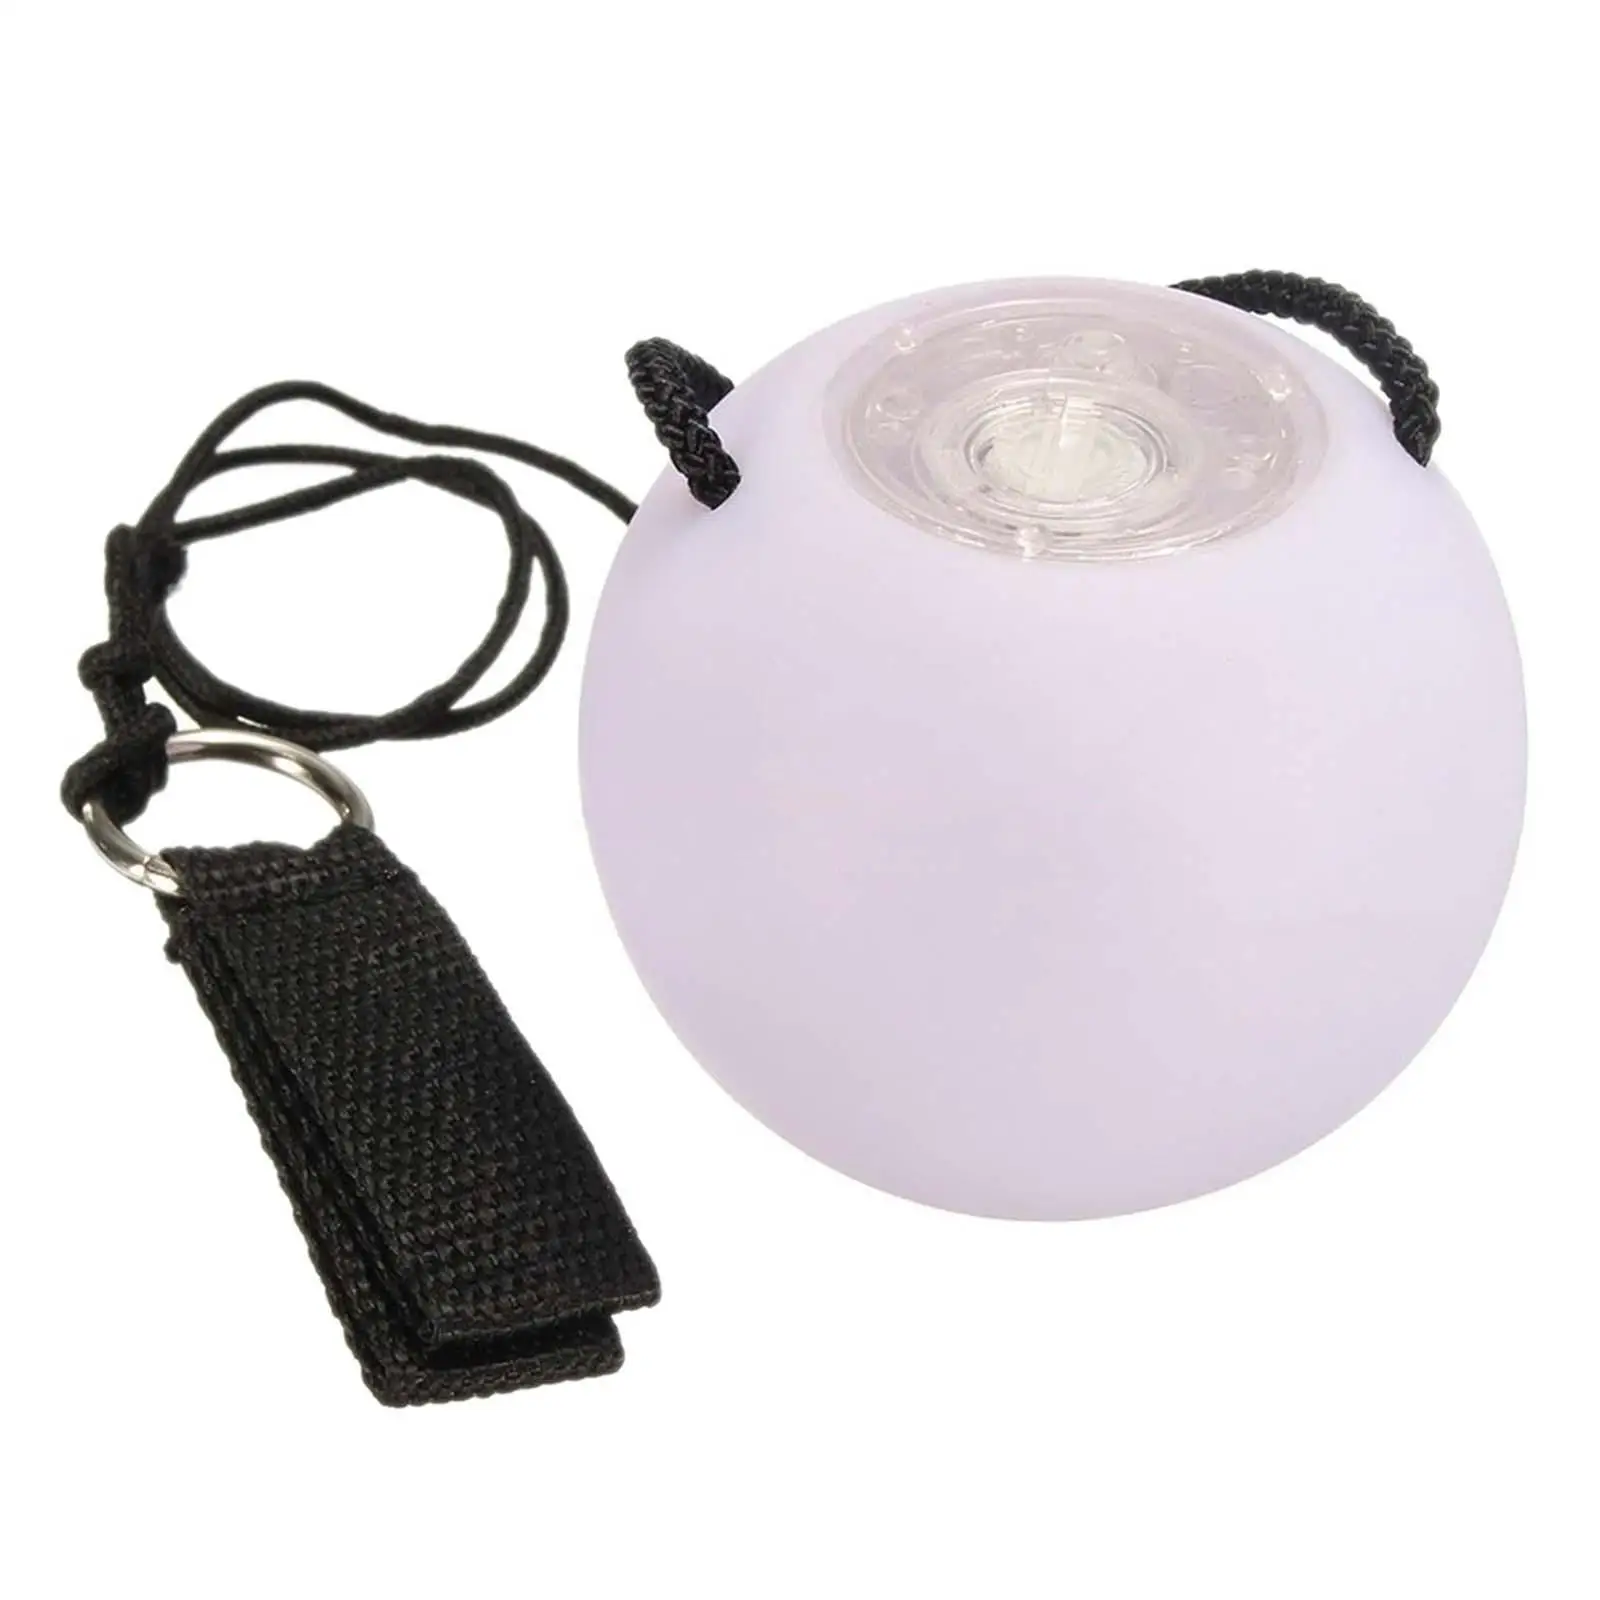 Ball Light up for Belly Dance Exercise Ball for Outdoor Activities Travel